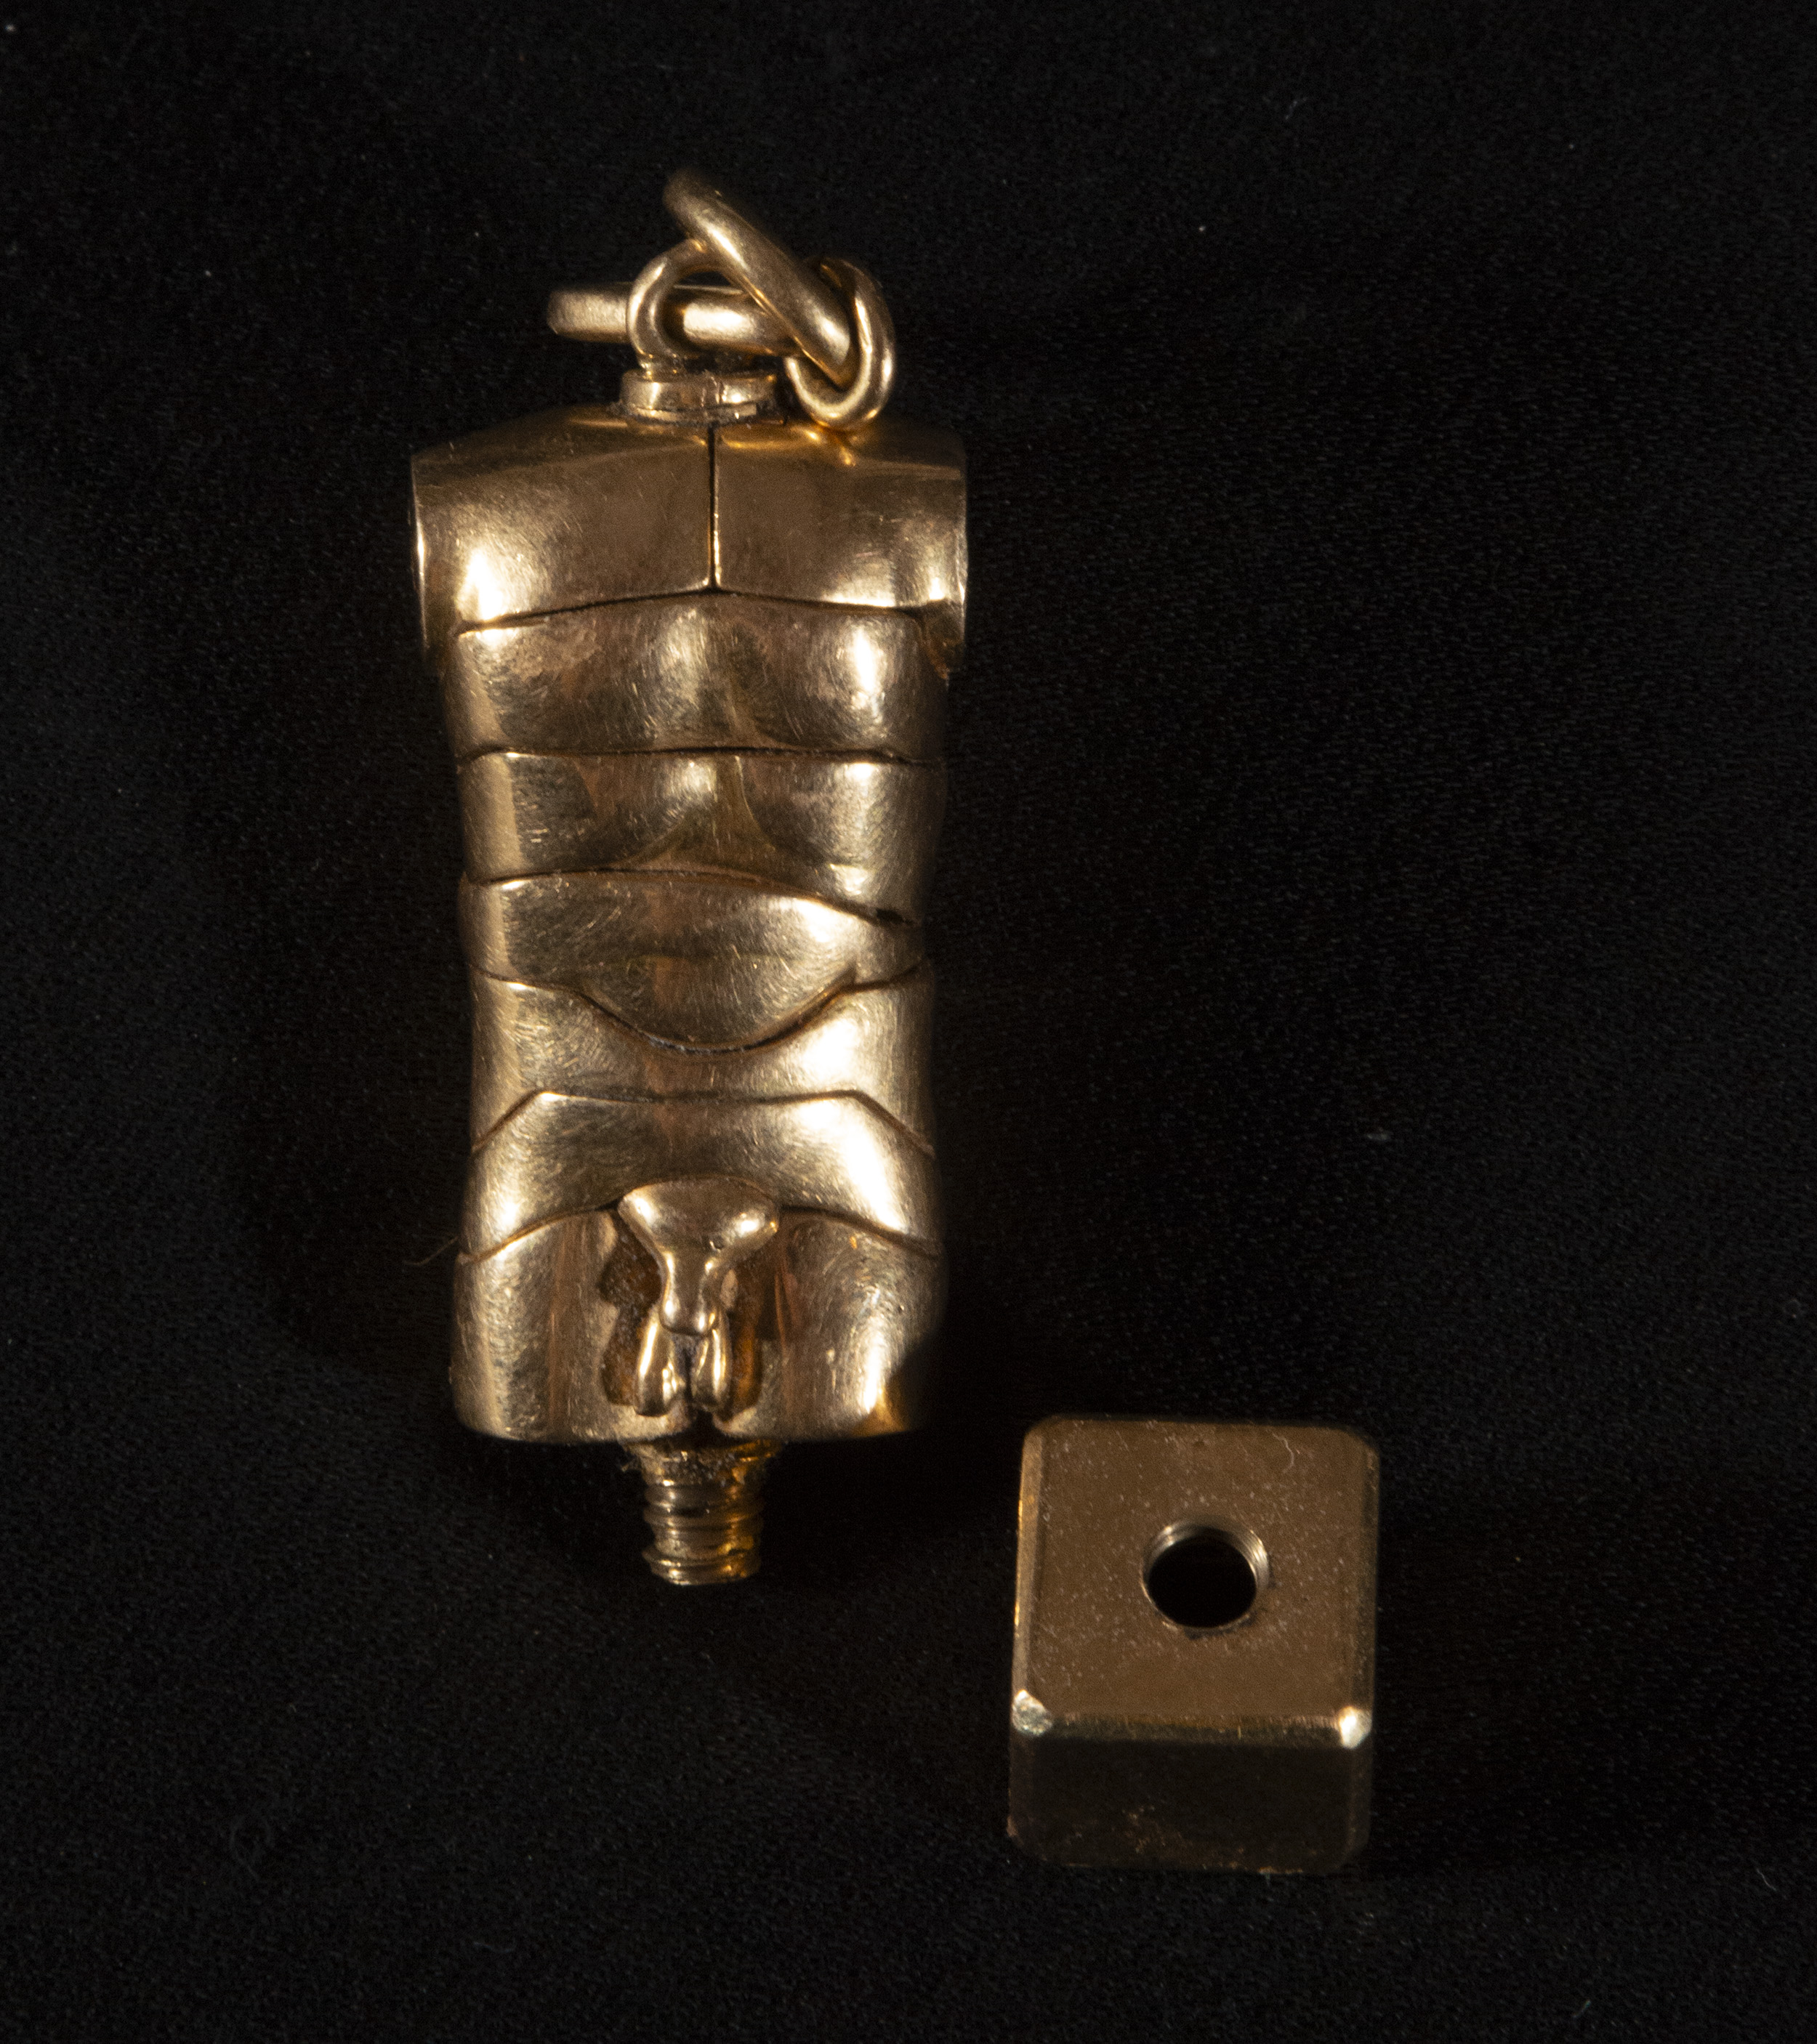 Bust of David pendant sculpture type jewel in 18k Lety gold and weight 110g - Image 3 of 6